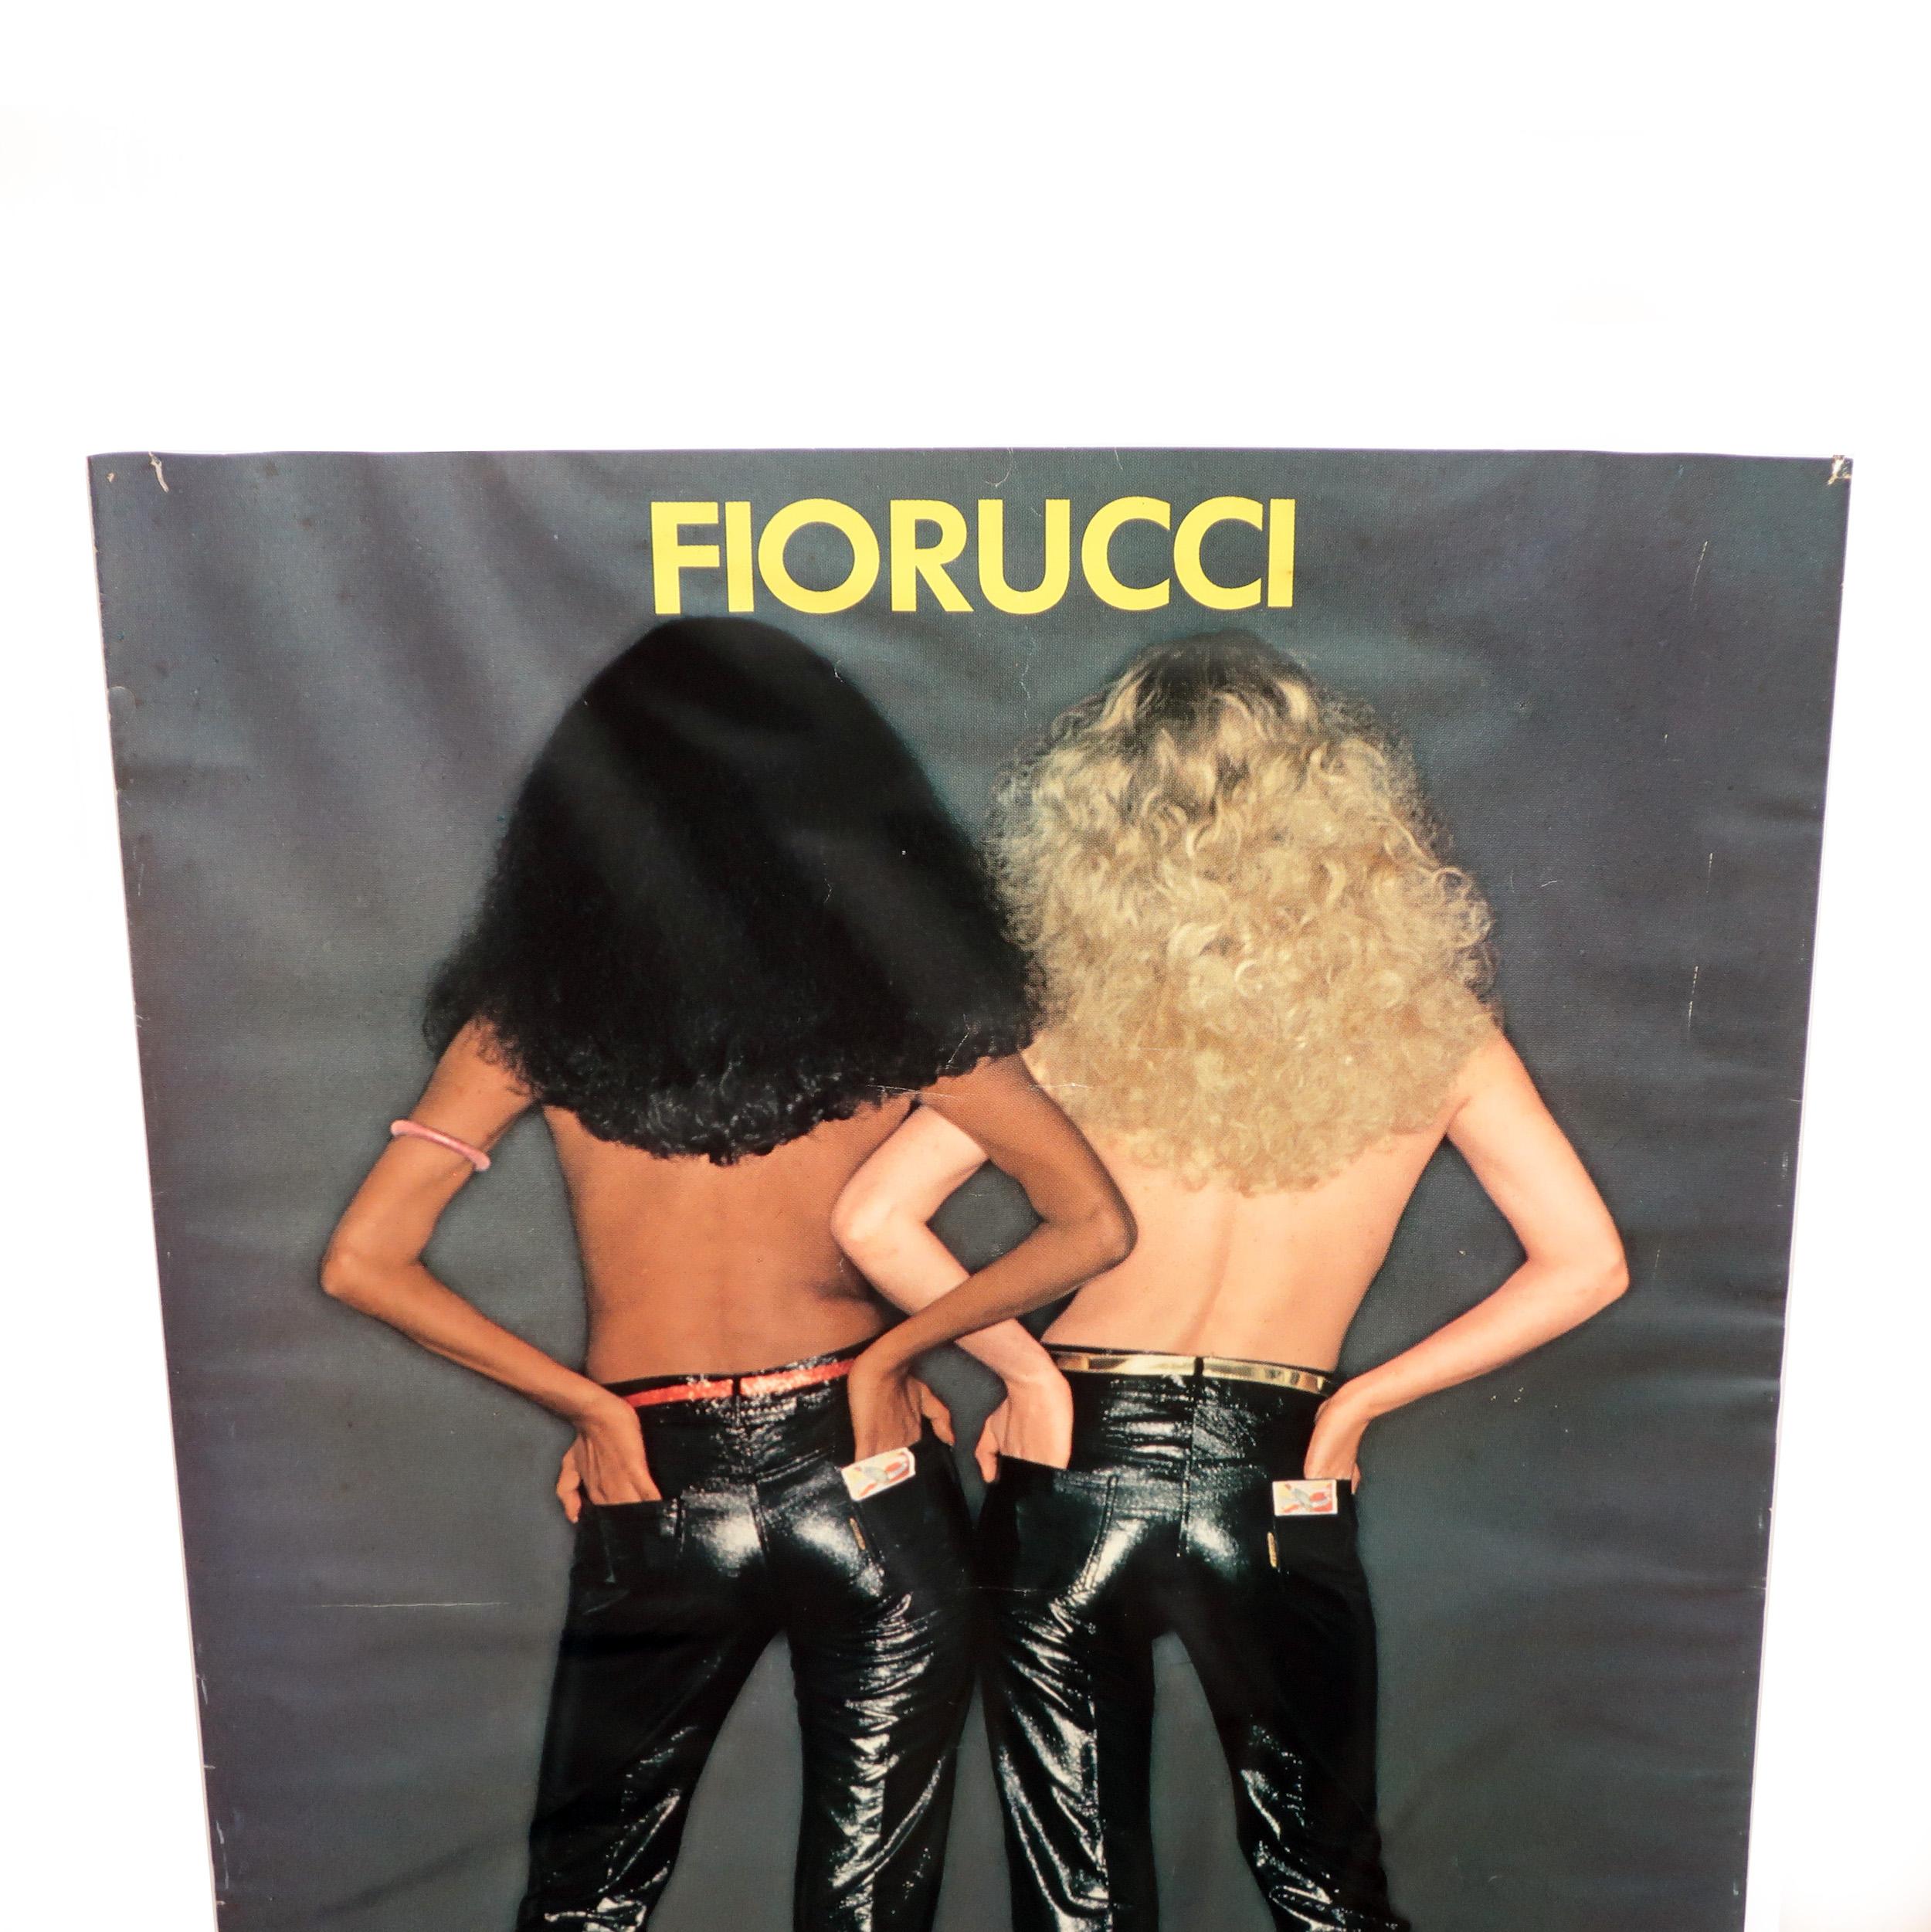 A vintage and rare Fiorucci poster with two women naked from the waist up wearing sparkly black pants and high heels. One model is Black with black hair and the other is white with blonde hair. Fiorucci branding appears in yellow at top center of